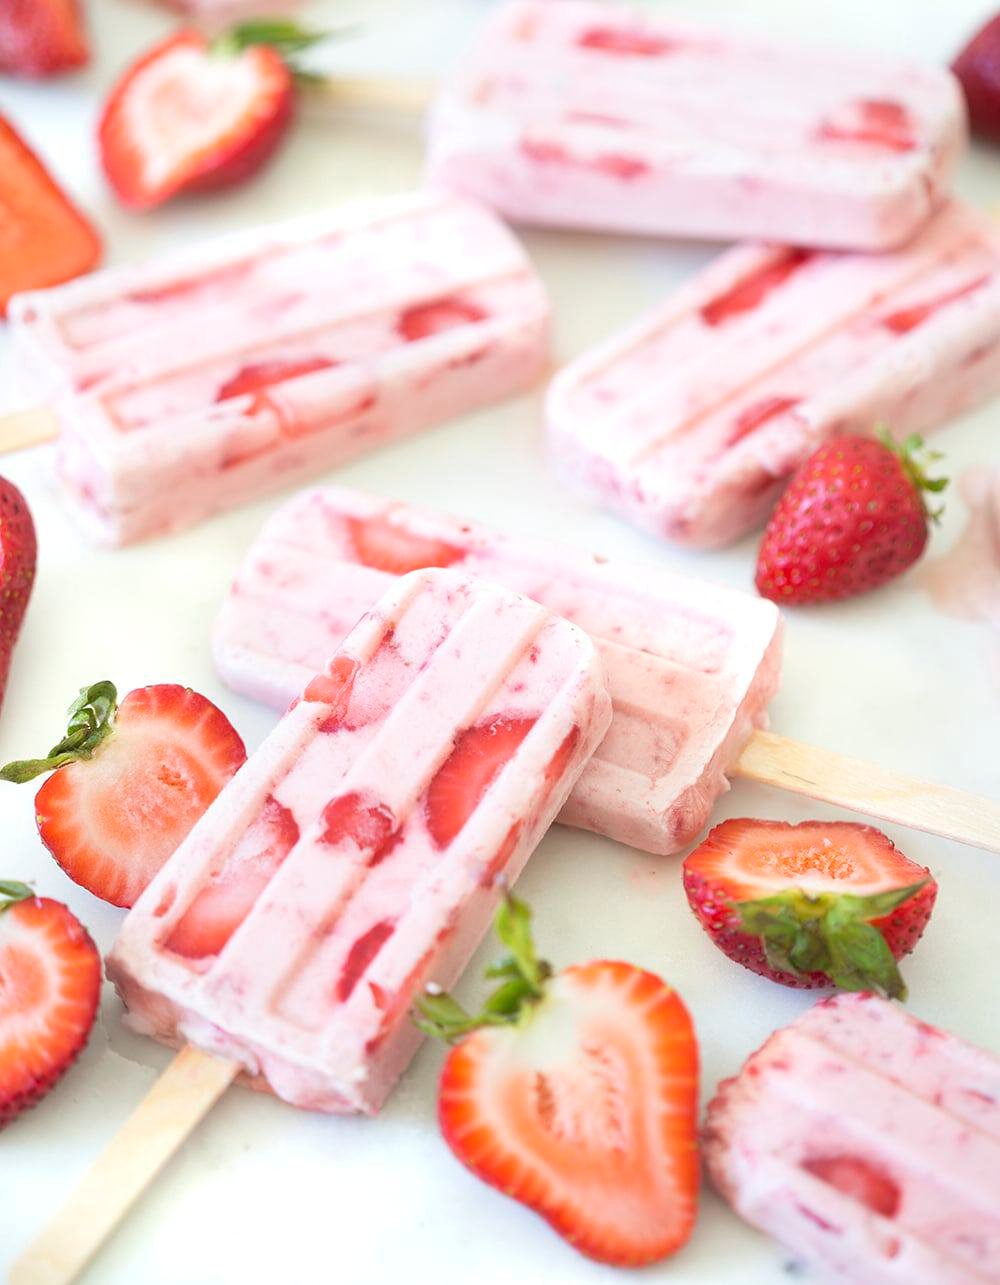 Strawberry Popsicles